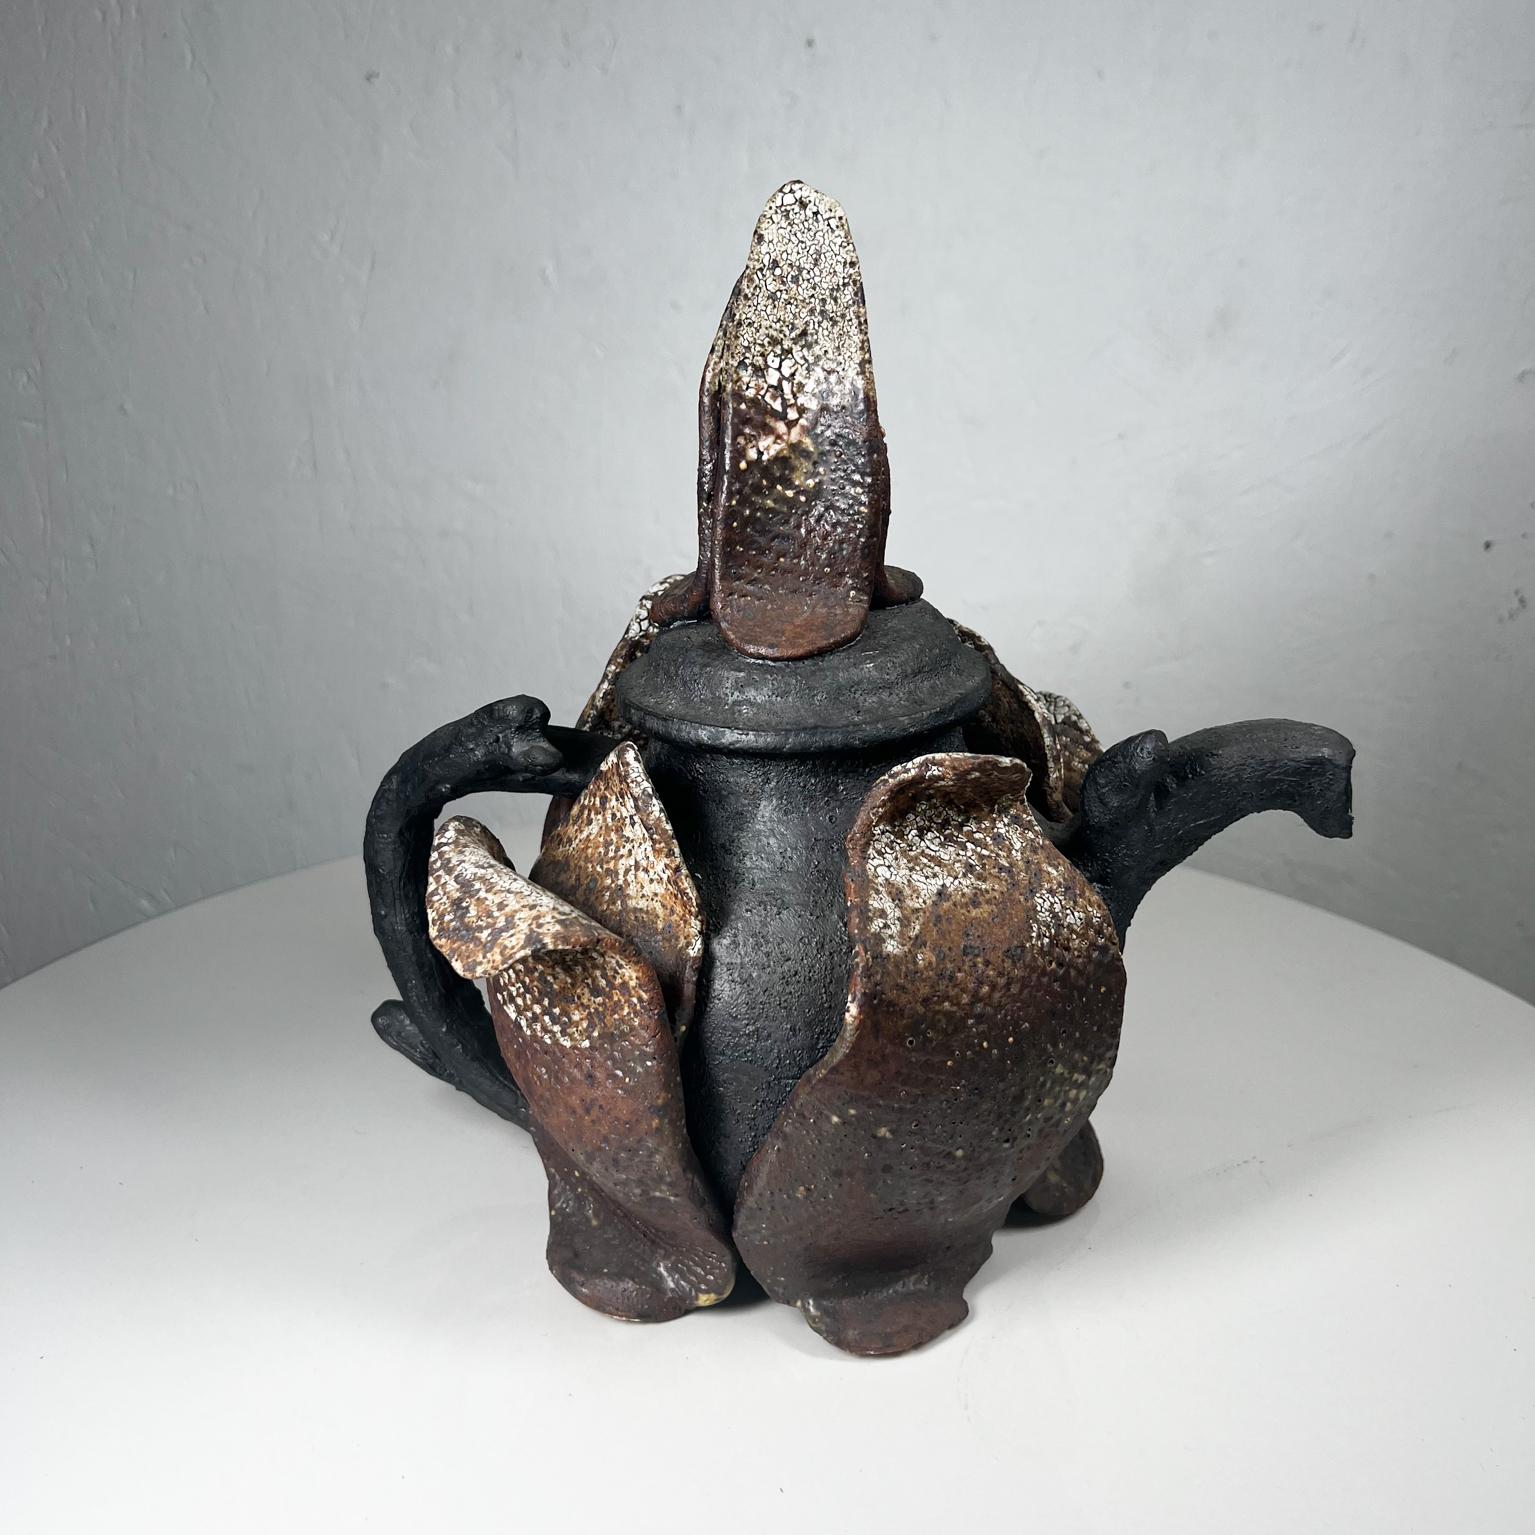 Sculptural tea pot design art pottery.
Measures: 10.75 tall x 19.25 deep x 7.75 wide
Unsigned. Untested. Decorative item.
Preowned original vintage condition.
See images listed please.

.